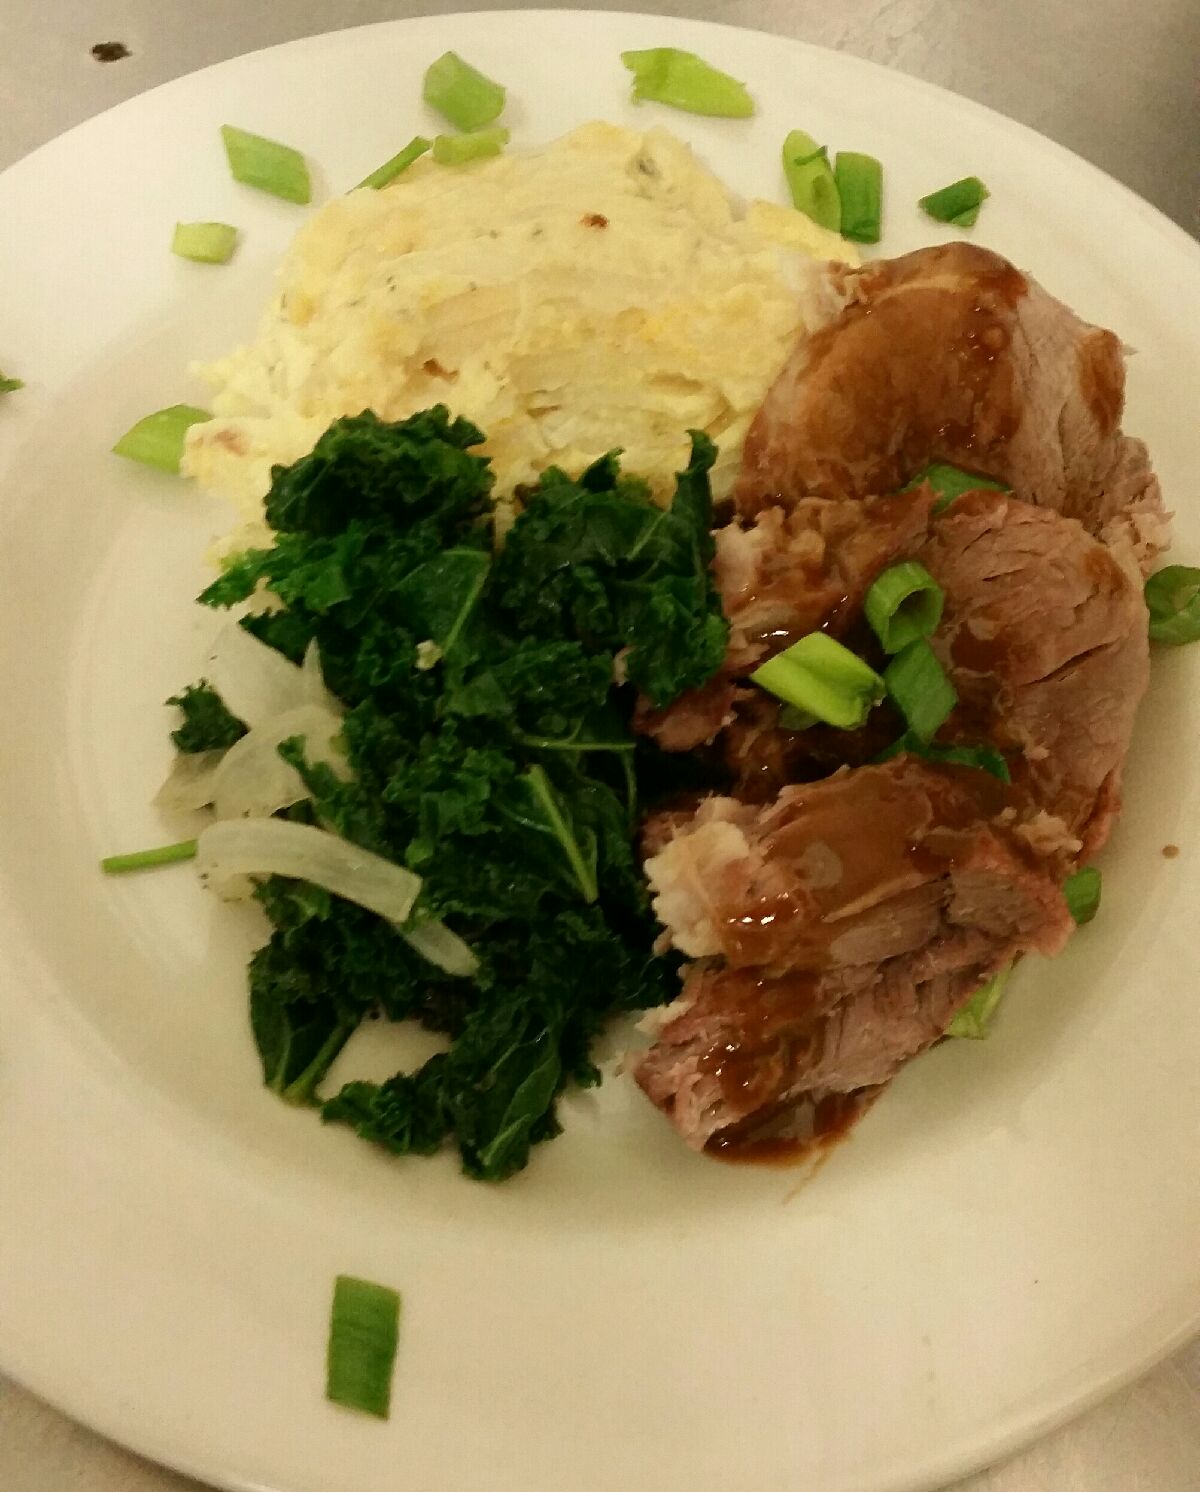 Braised pork with Au gratin potatoes and kale